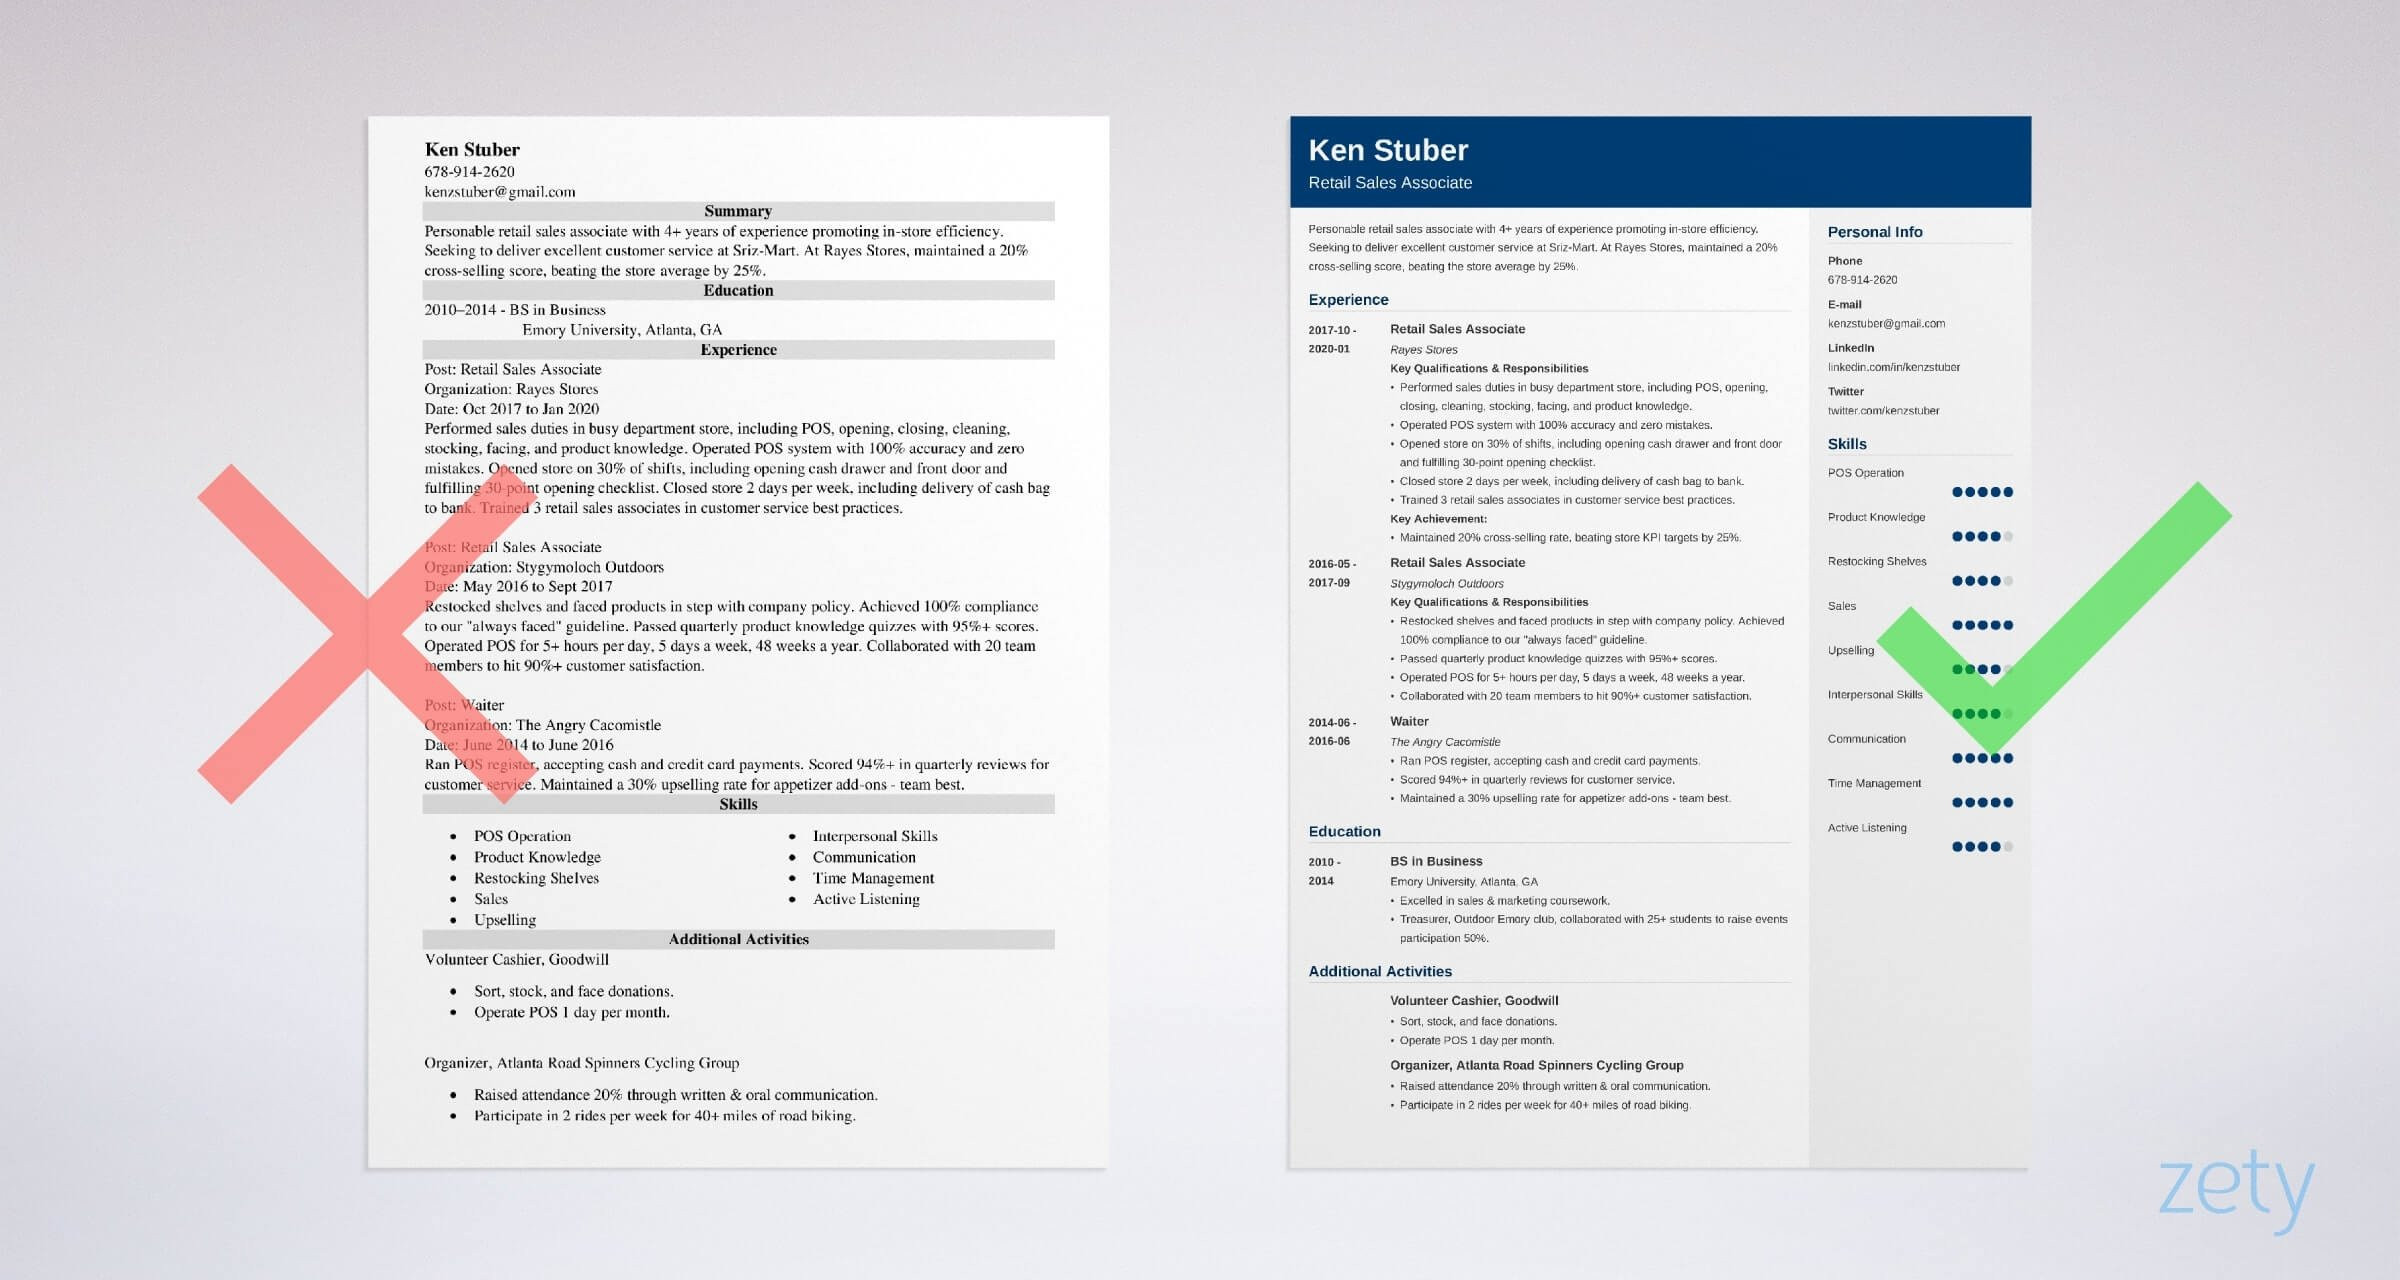 Sample Resume for Sales Lady In Department Store Retail Sales associate Resume: Samples and Guide